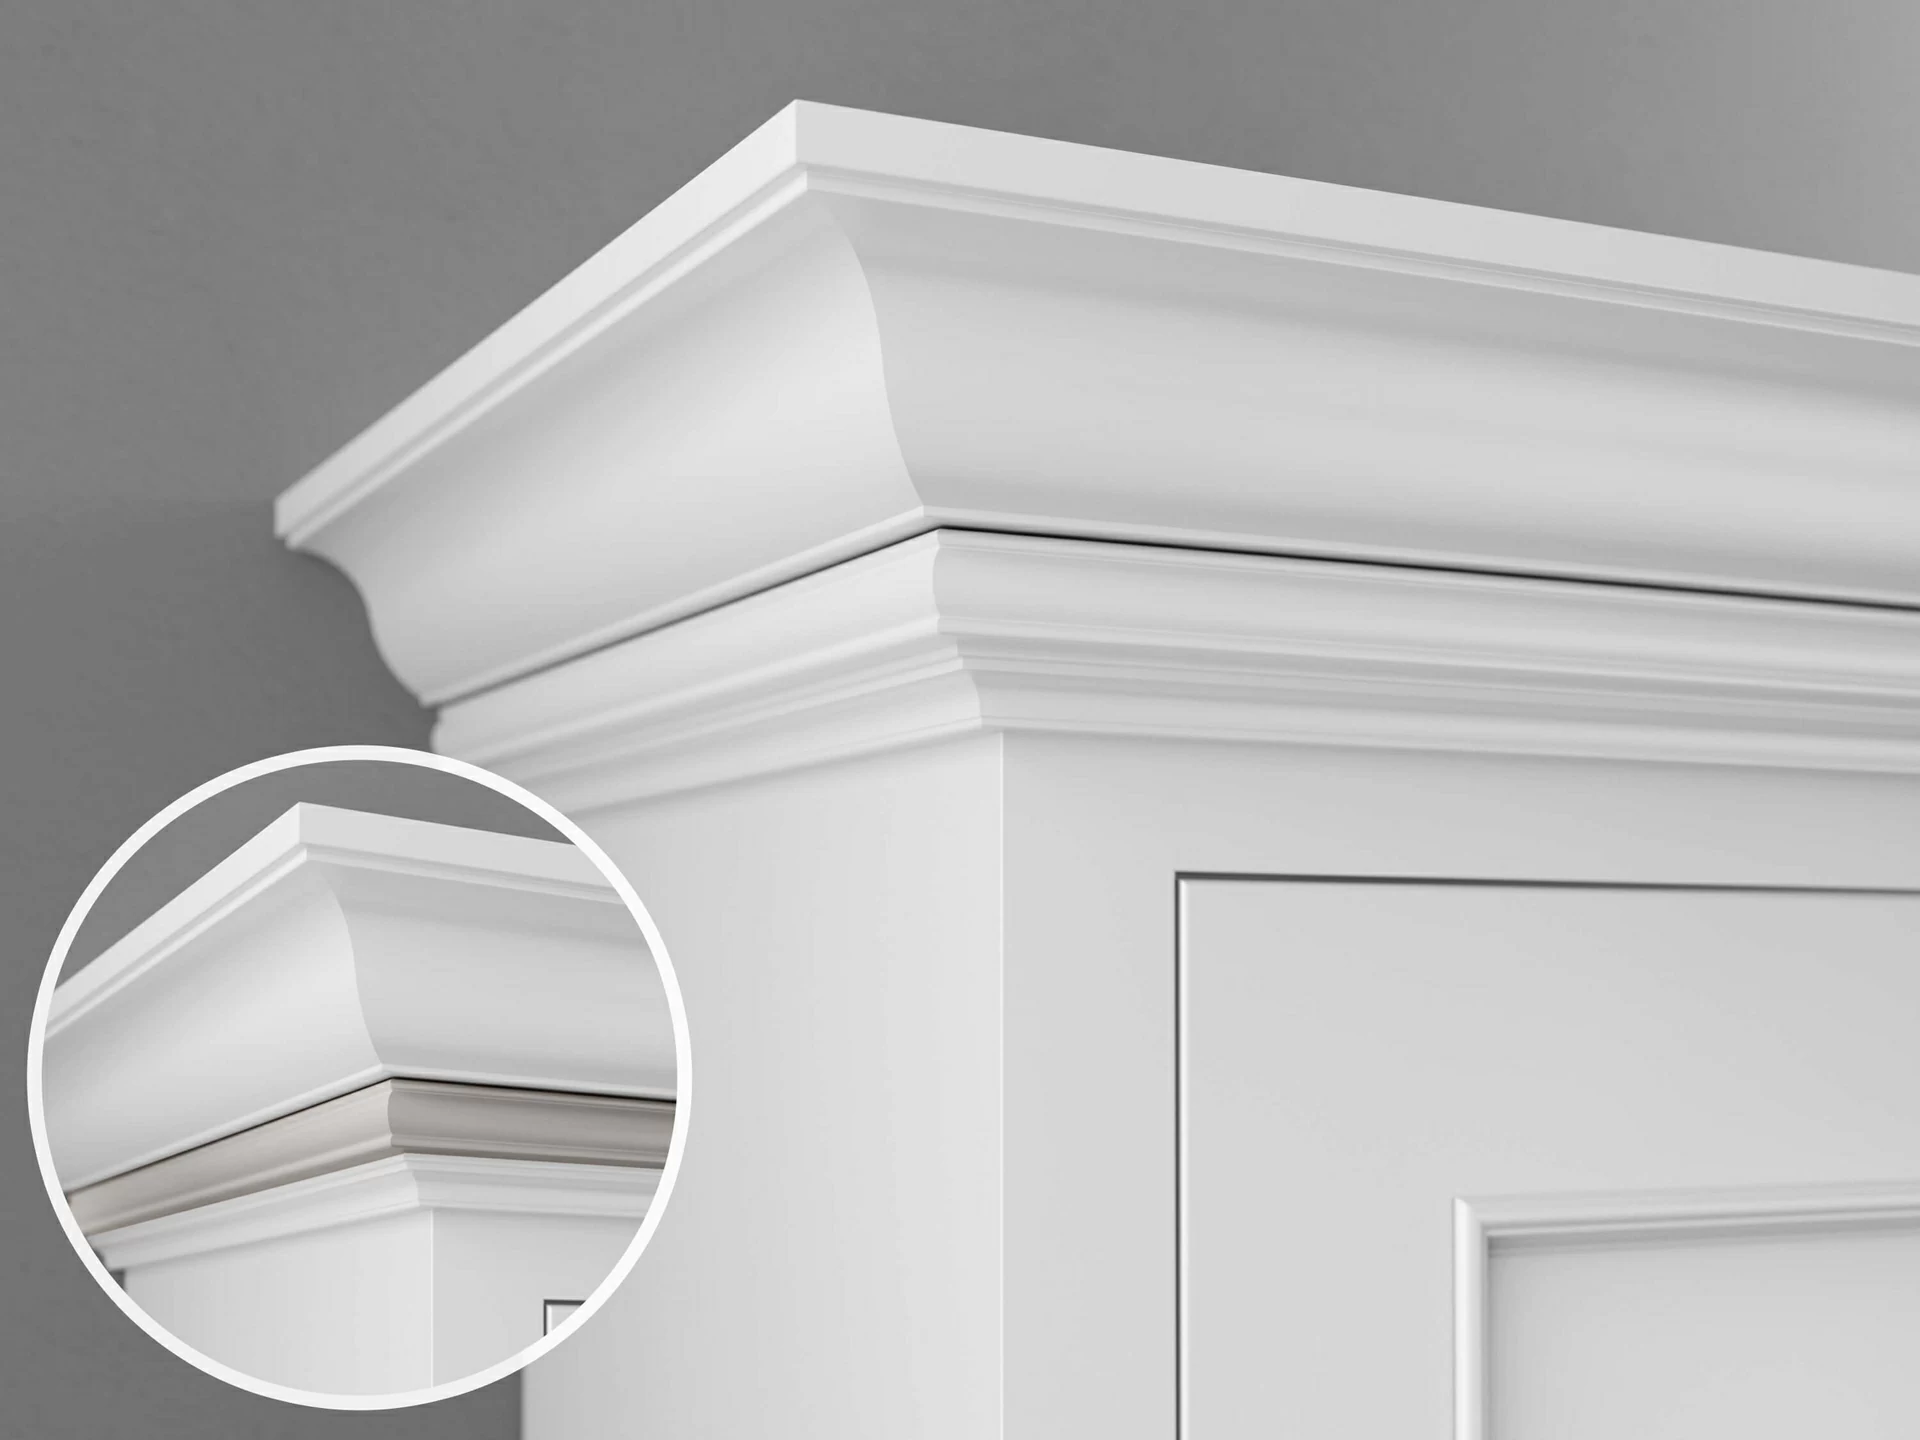 A close up of Flex Crown Molding at the top of a kitchen cabinet from Dura Supreme Cabinetry. Showing how different accent molding styles can be inserted into the flex groove to create a unique molding.